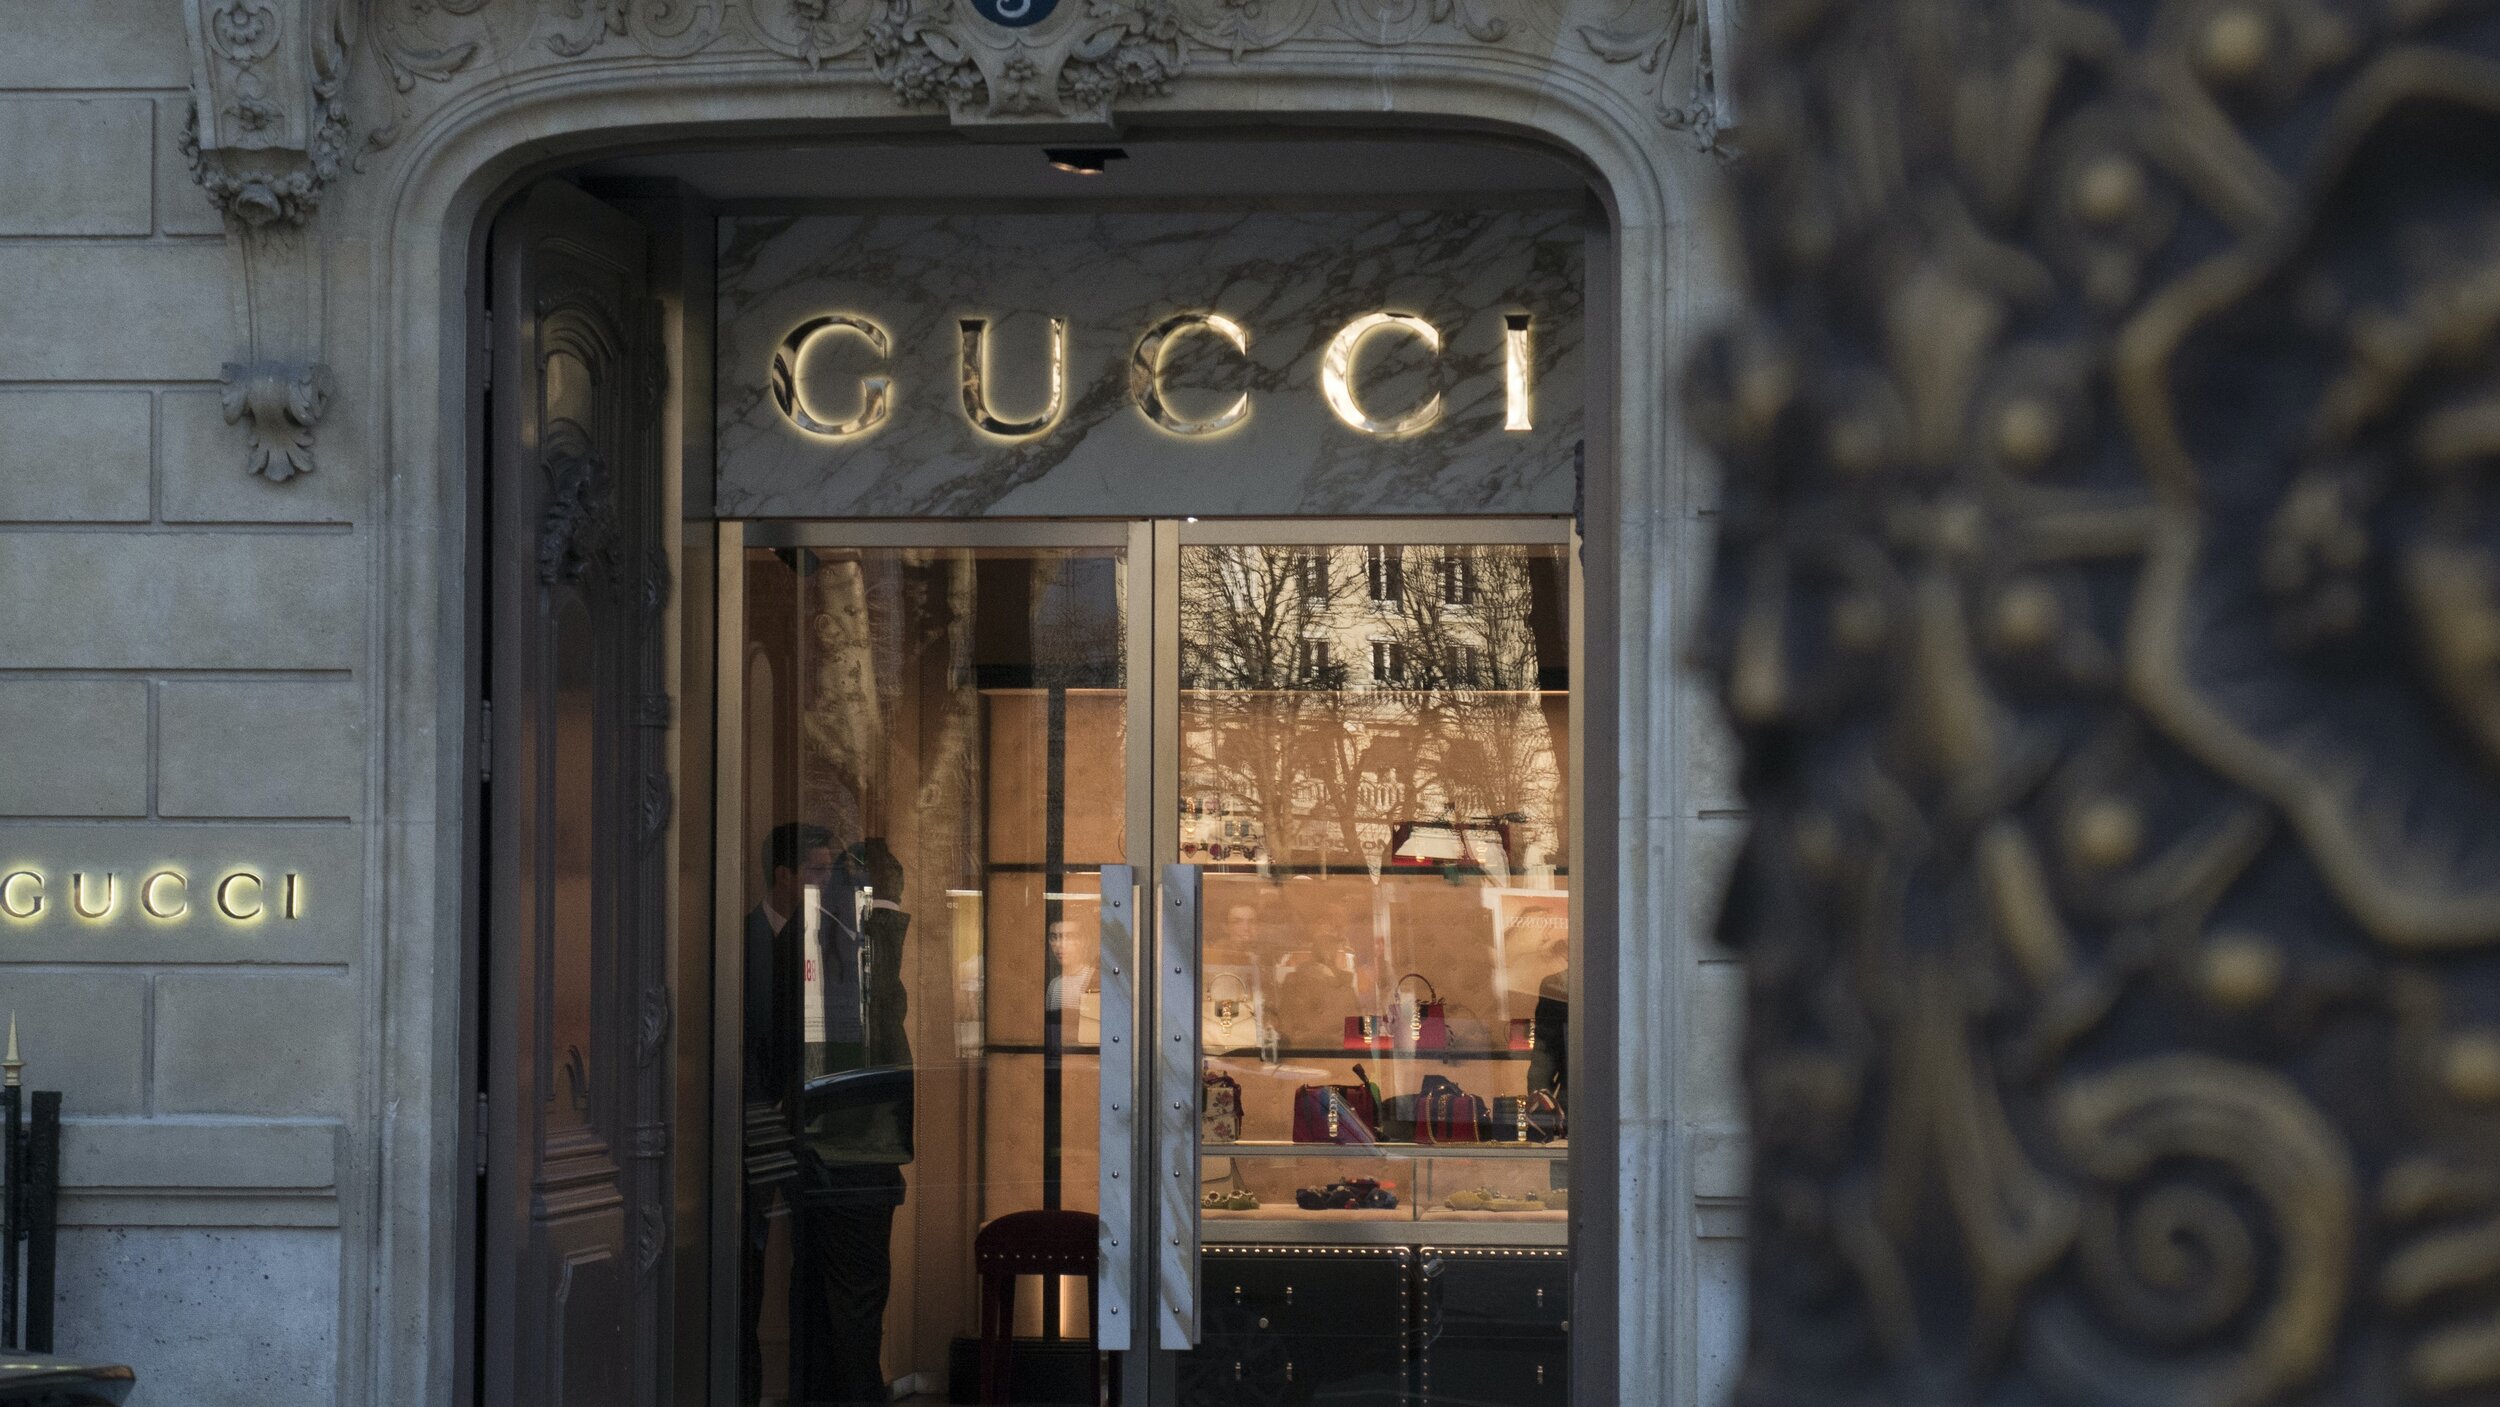 What is the lowest priced item I can purchase in Gucci? - Quora